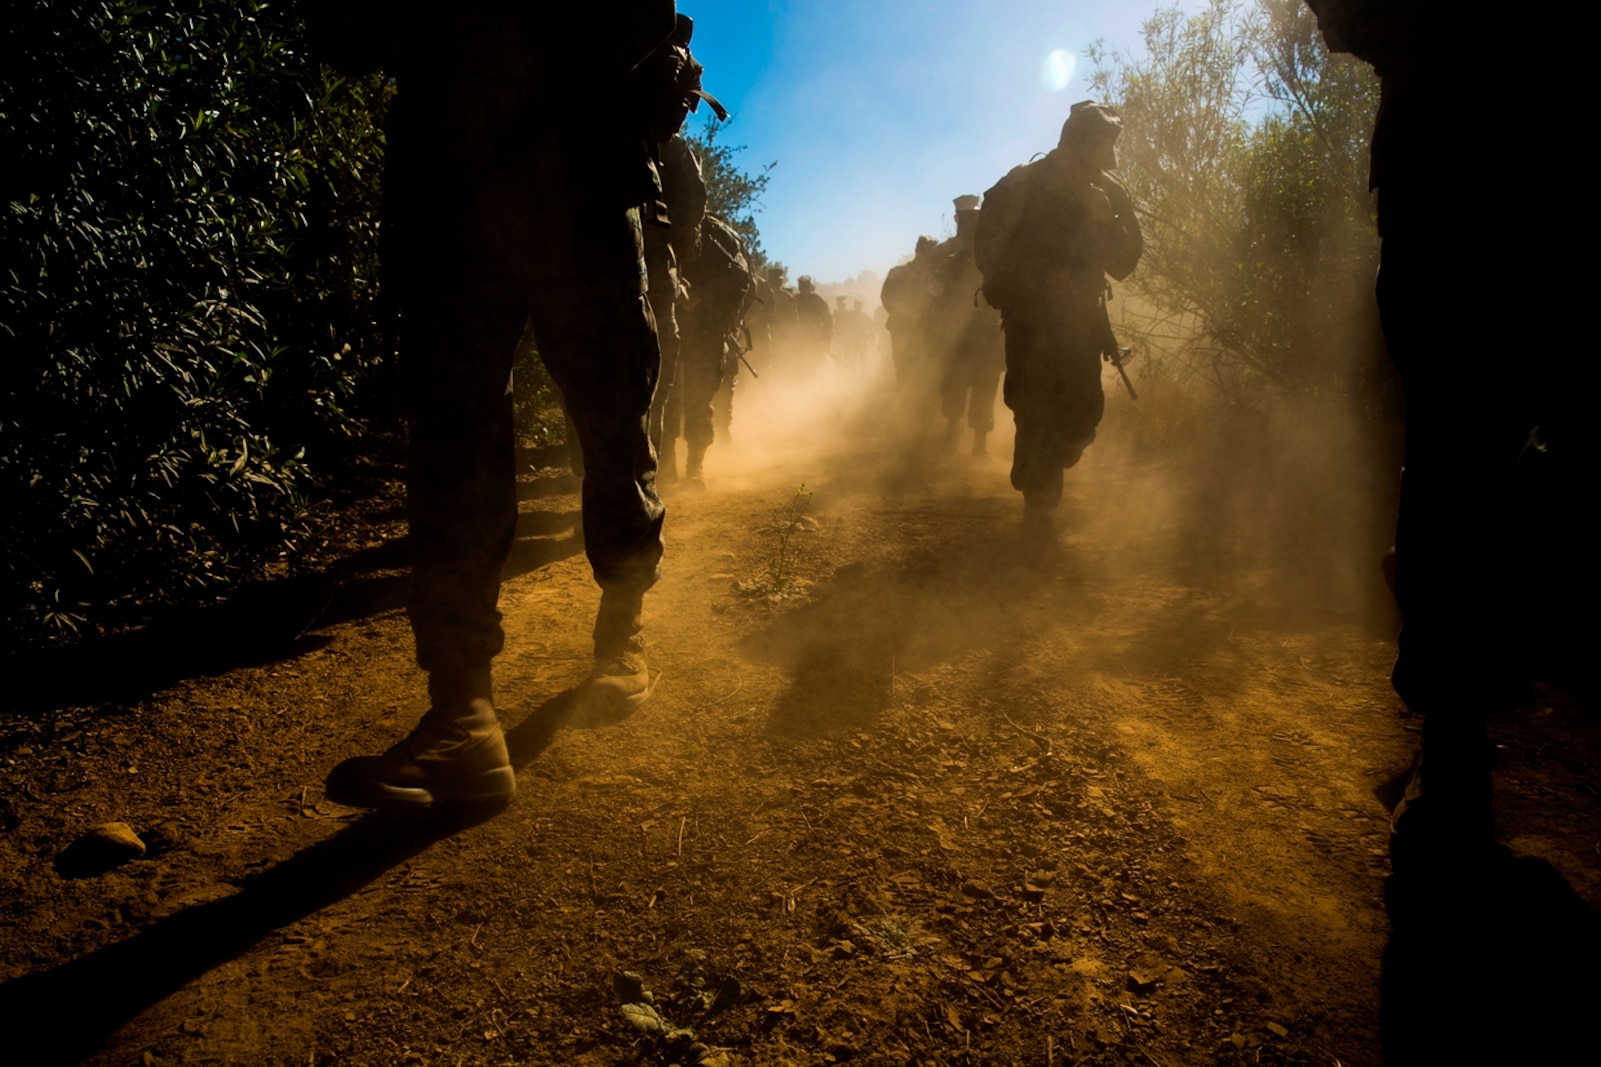 U.S. Marines and Sailors with Combat Logistics Battalion 5, Combat Logistics Regiment 1, 1st Marine Logistics Group participate in a seven mile conditioning hike on Camp Pendleton, Calif., June 27, 2017. The Marines have multiple conditioning hikes to prepare for Mountain Exercise 4-17 which will be conducted at the Marine Corps Mountain Warfare Training Center in Bridgeport, Calif. (U.S. Marine Corps photo by Lance Cpl. Adam Dublinske)